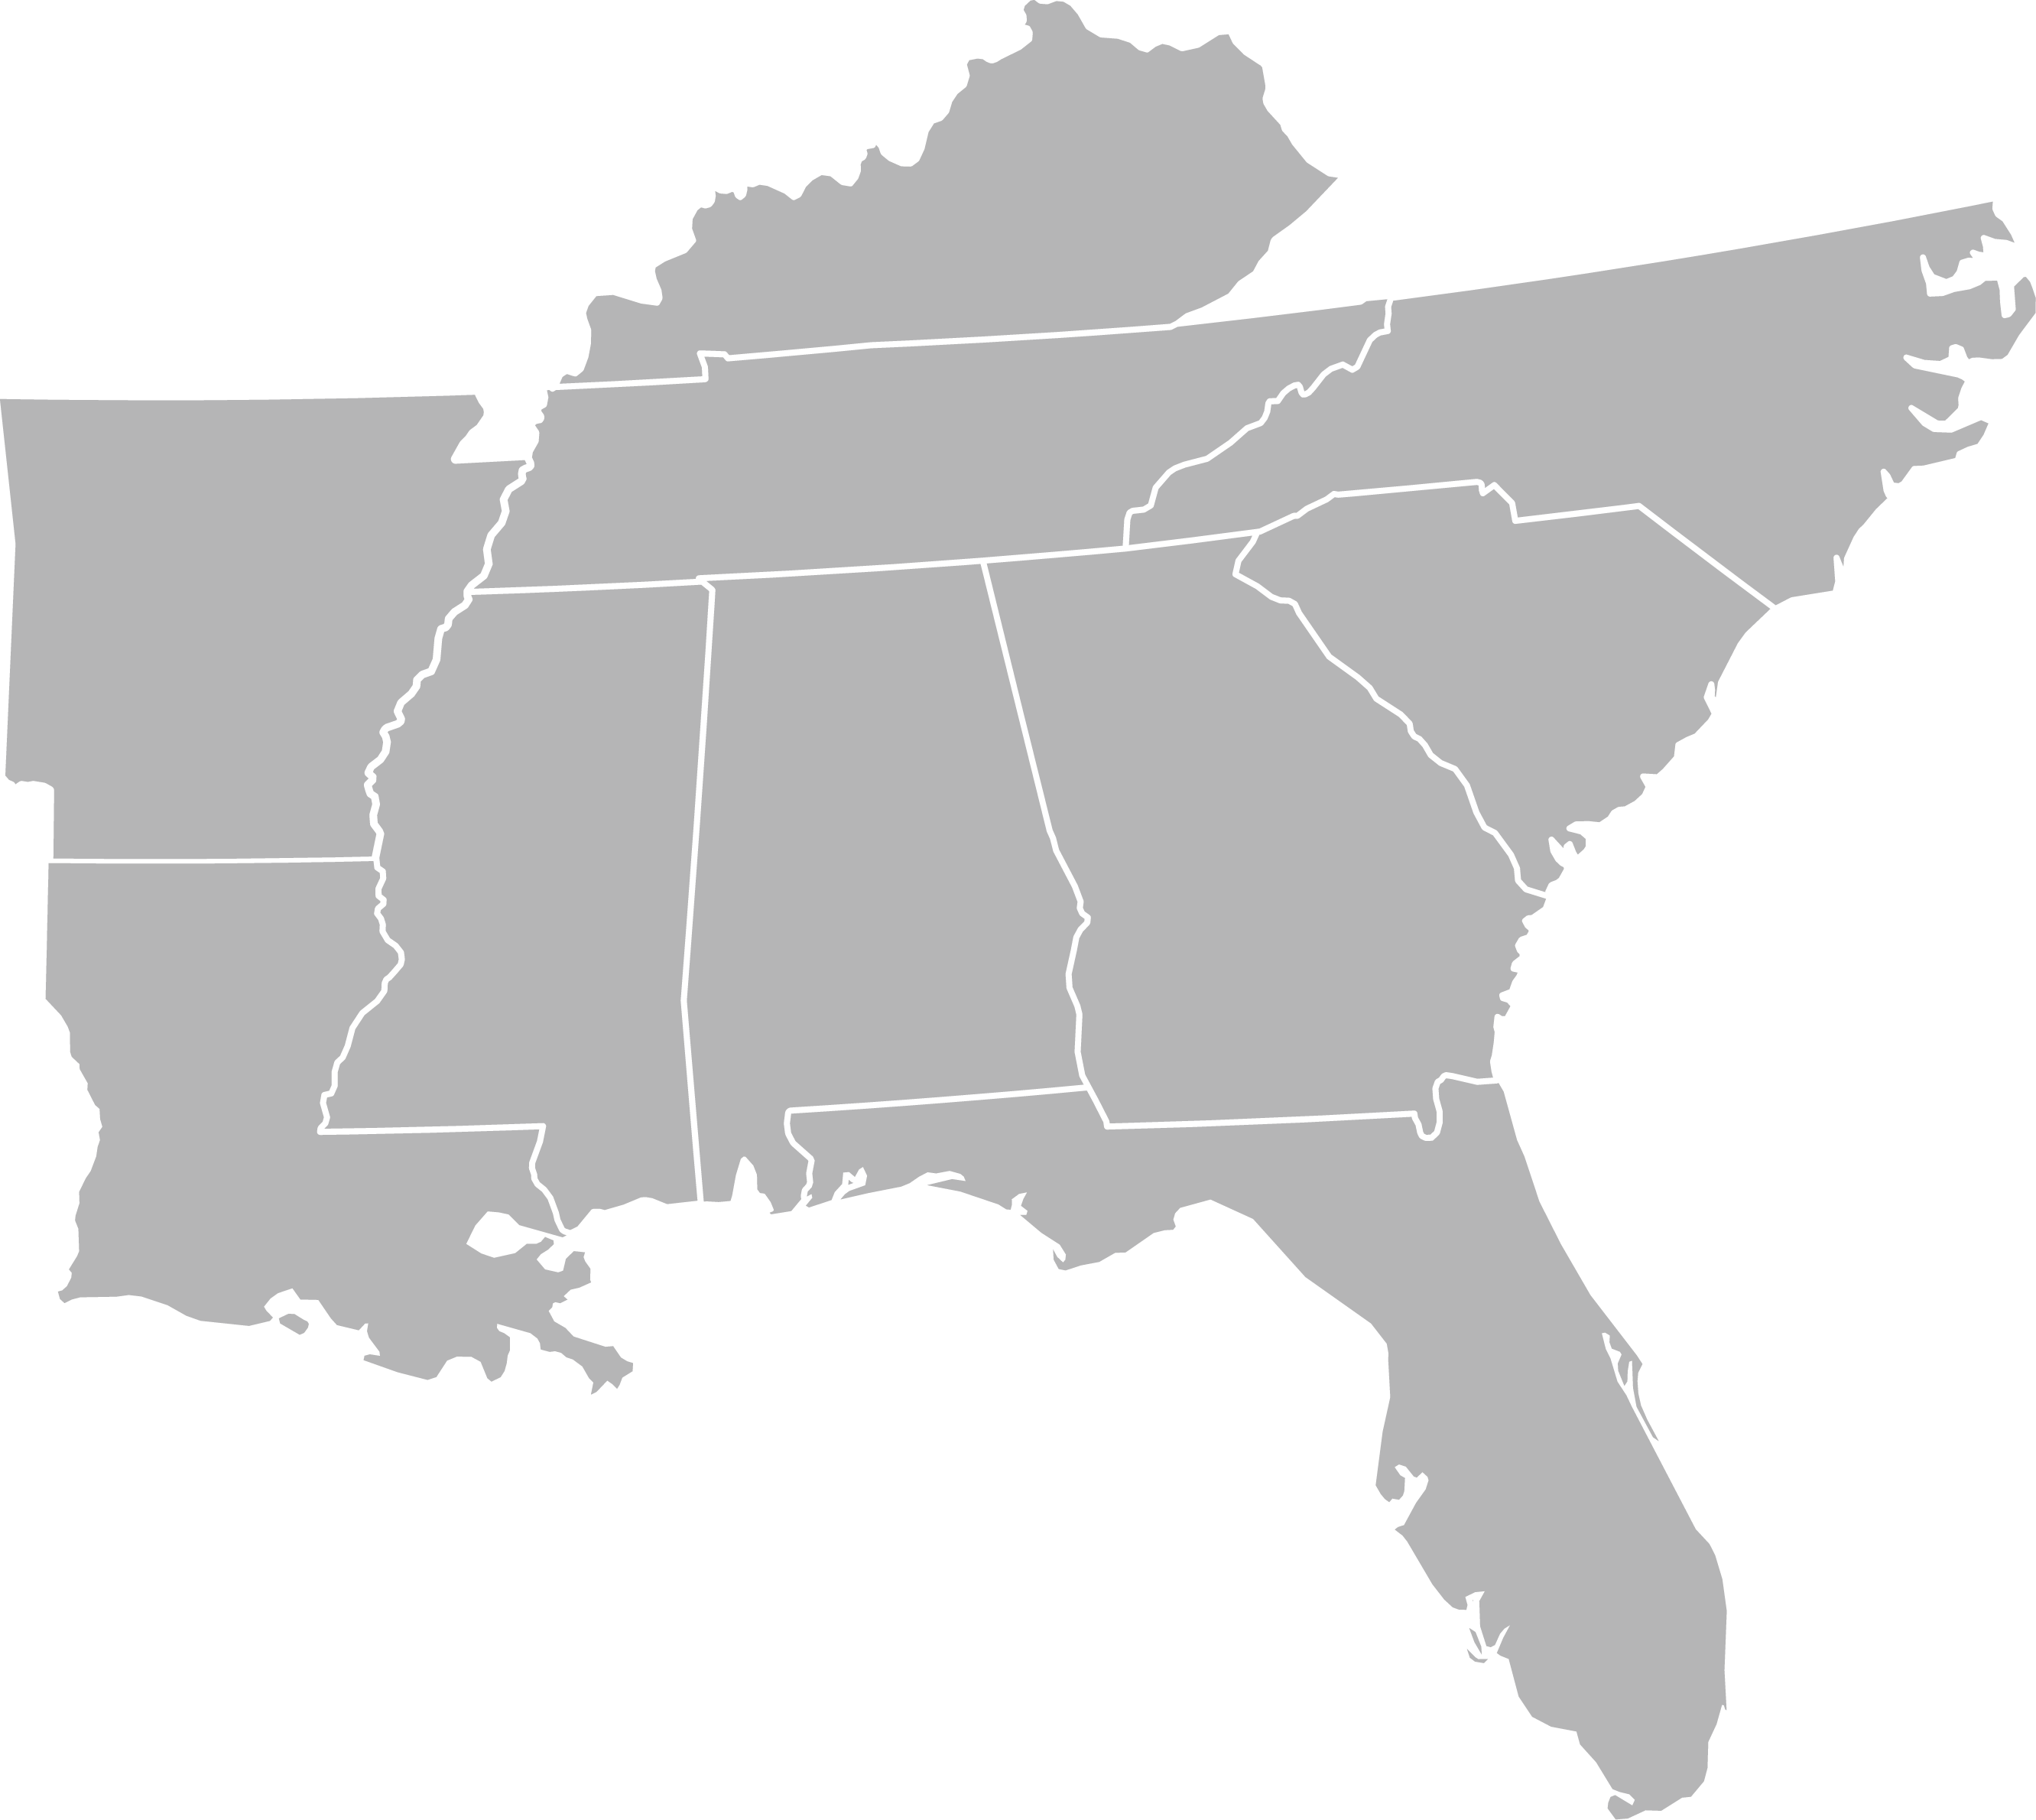 Map of the southeastern United States in gray.